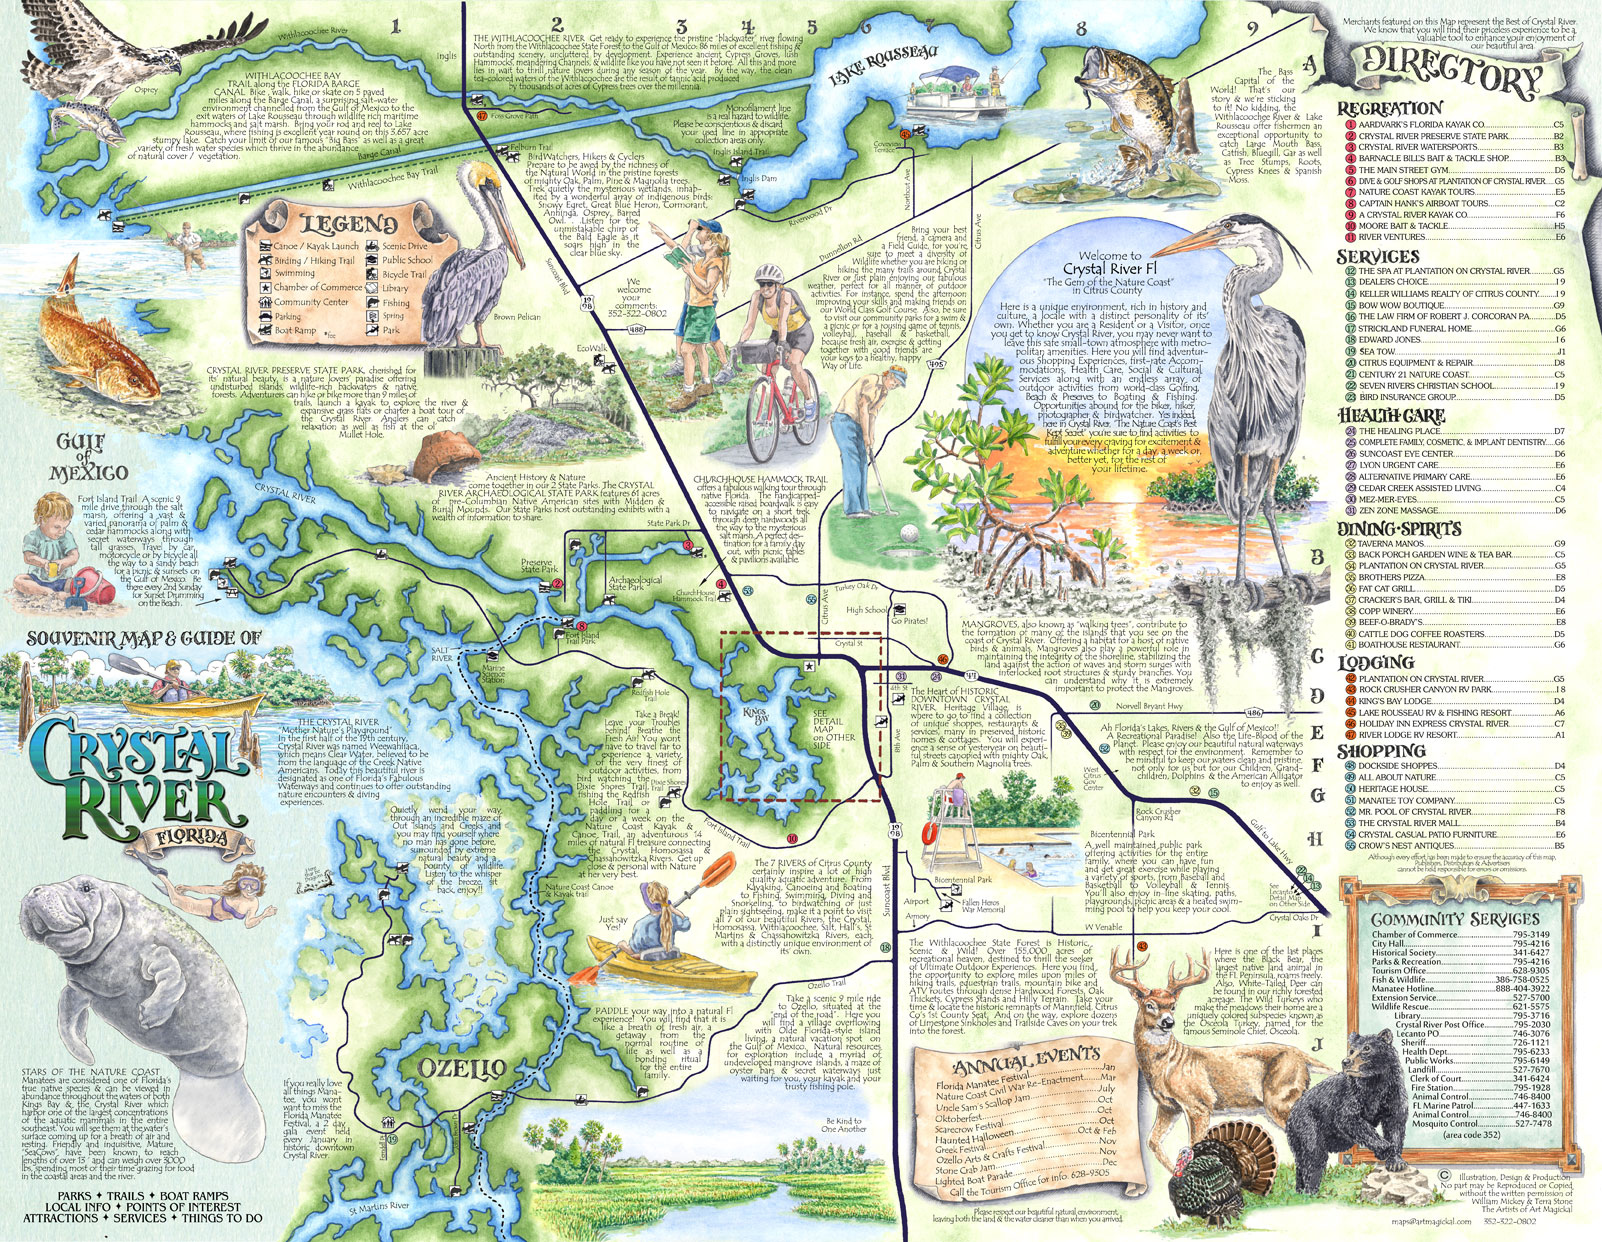 The Souvenir Map Guide Of Crystal River Fl